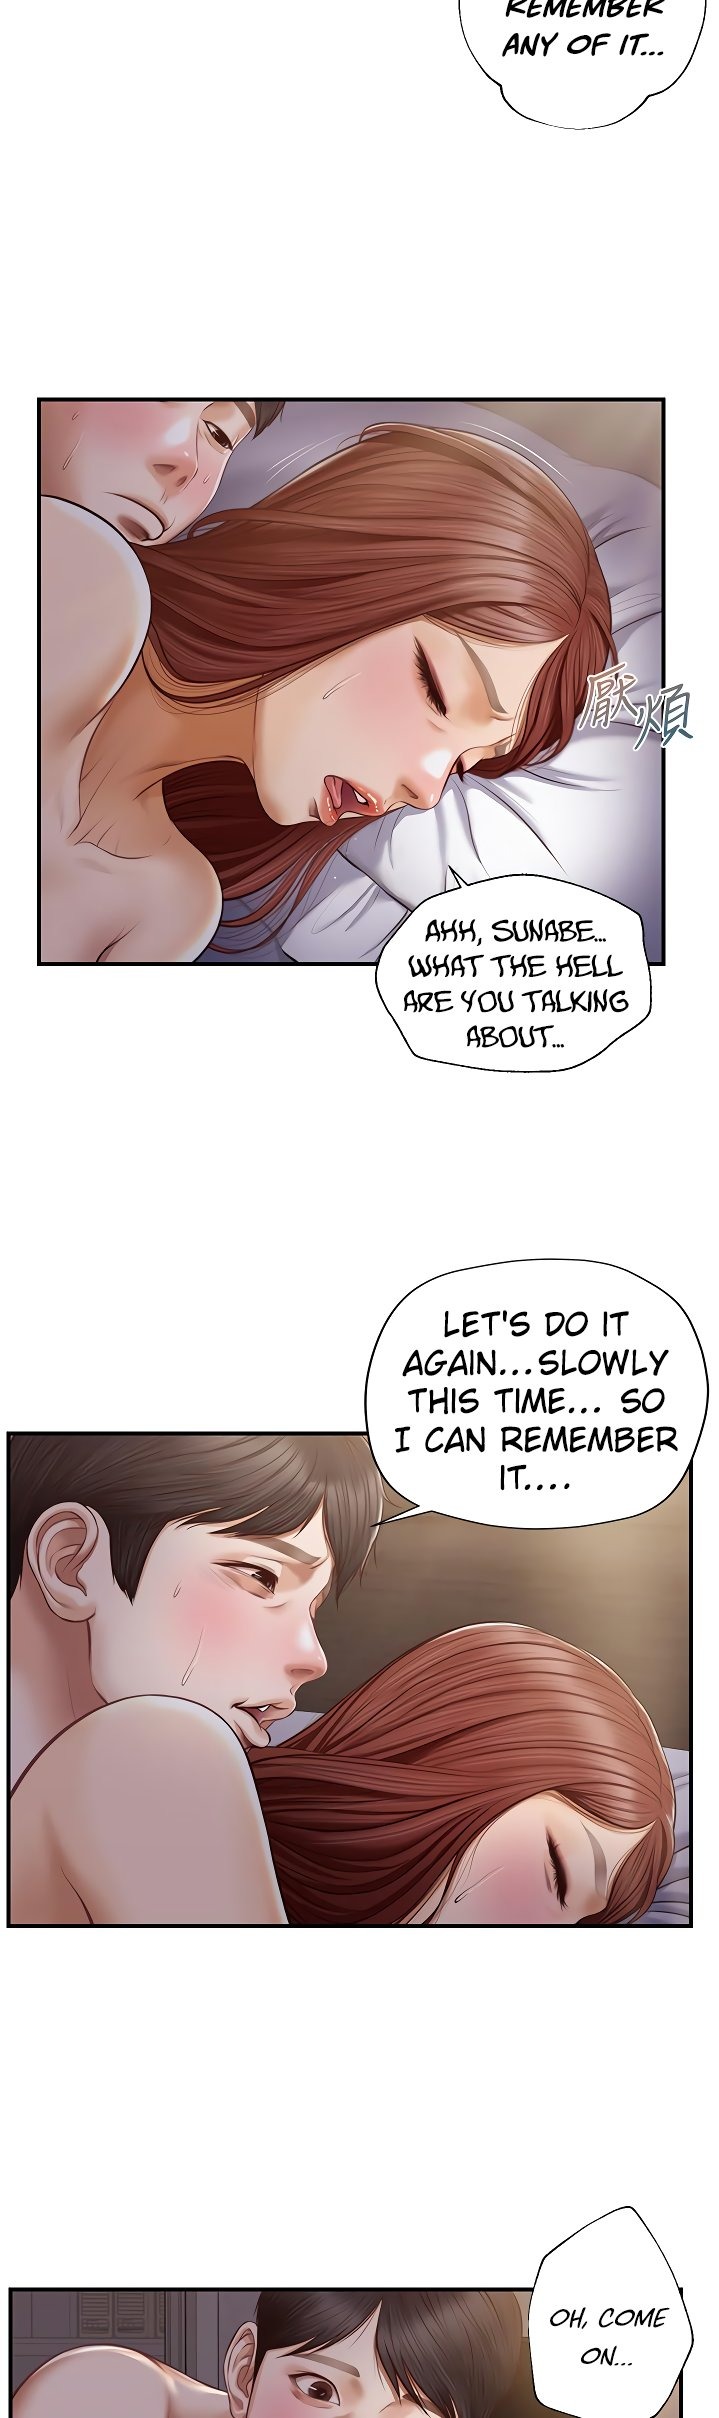 Age of Innocence - Chapter 8 Page 11